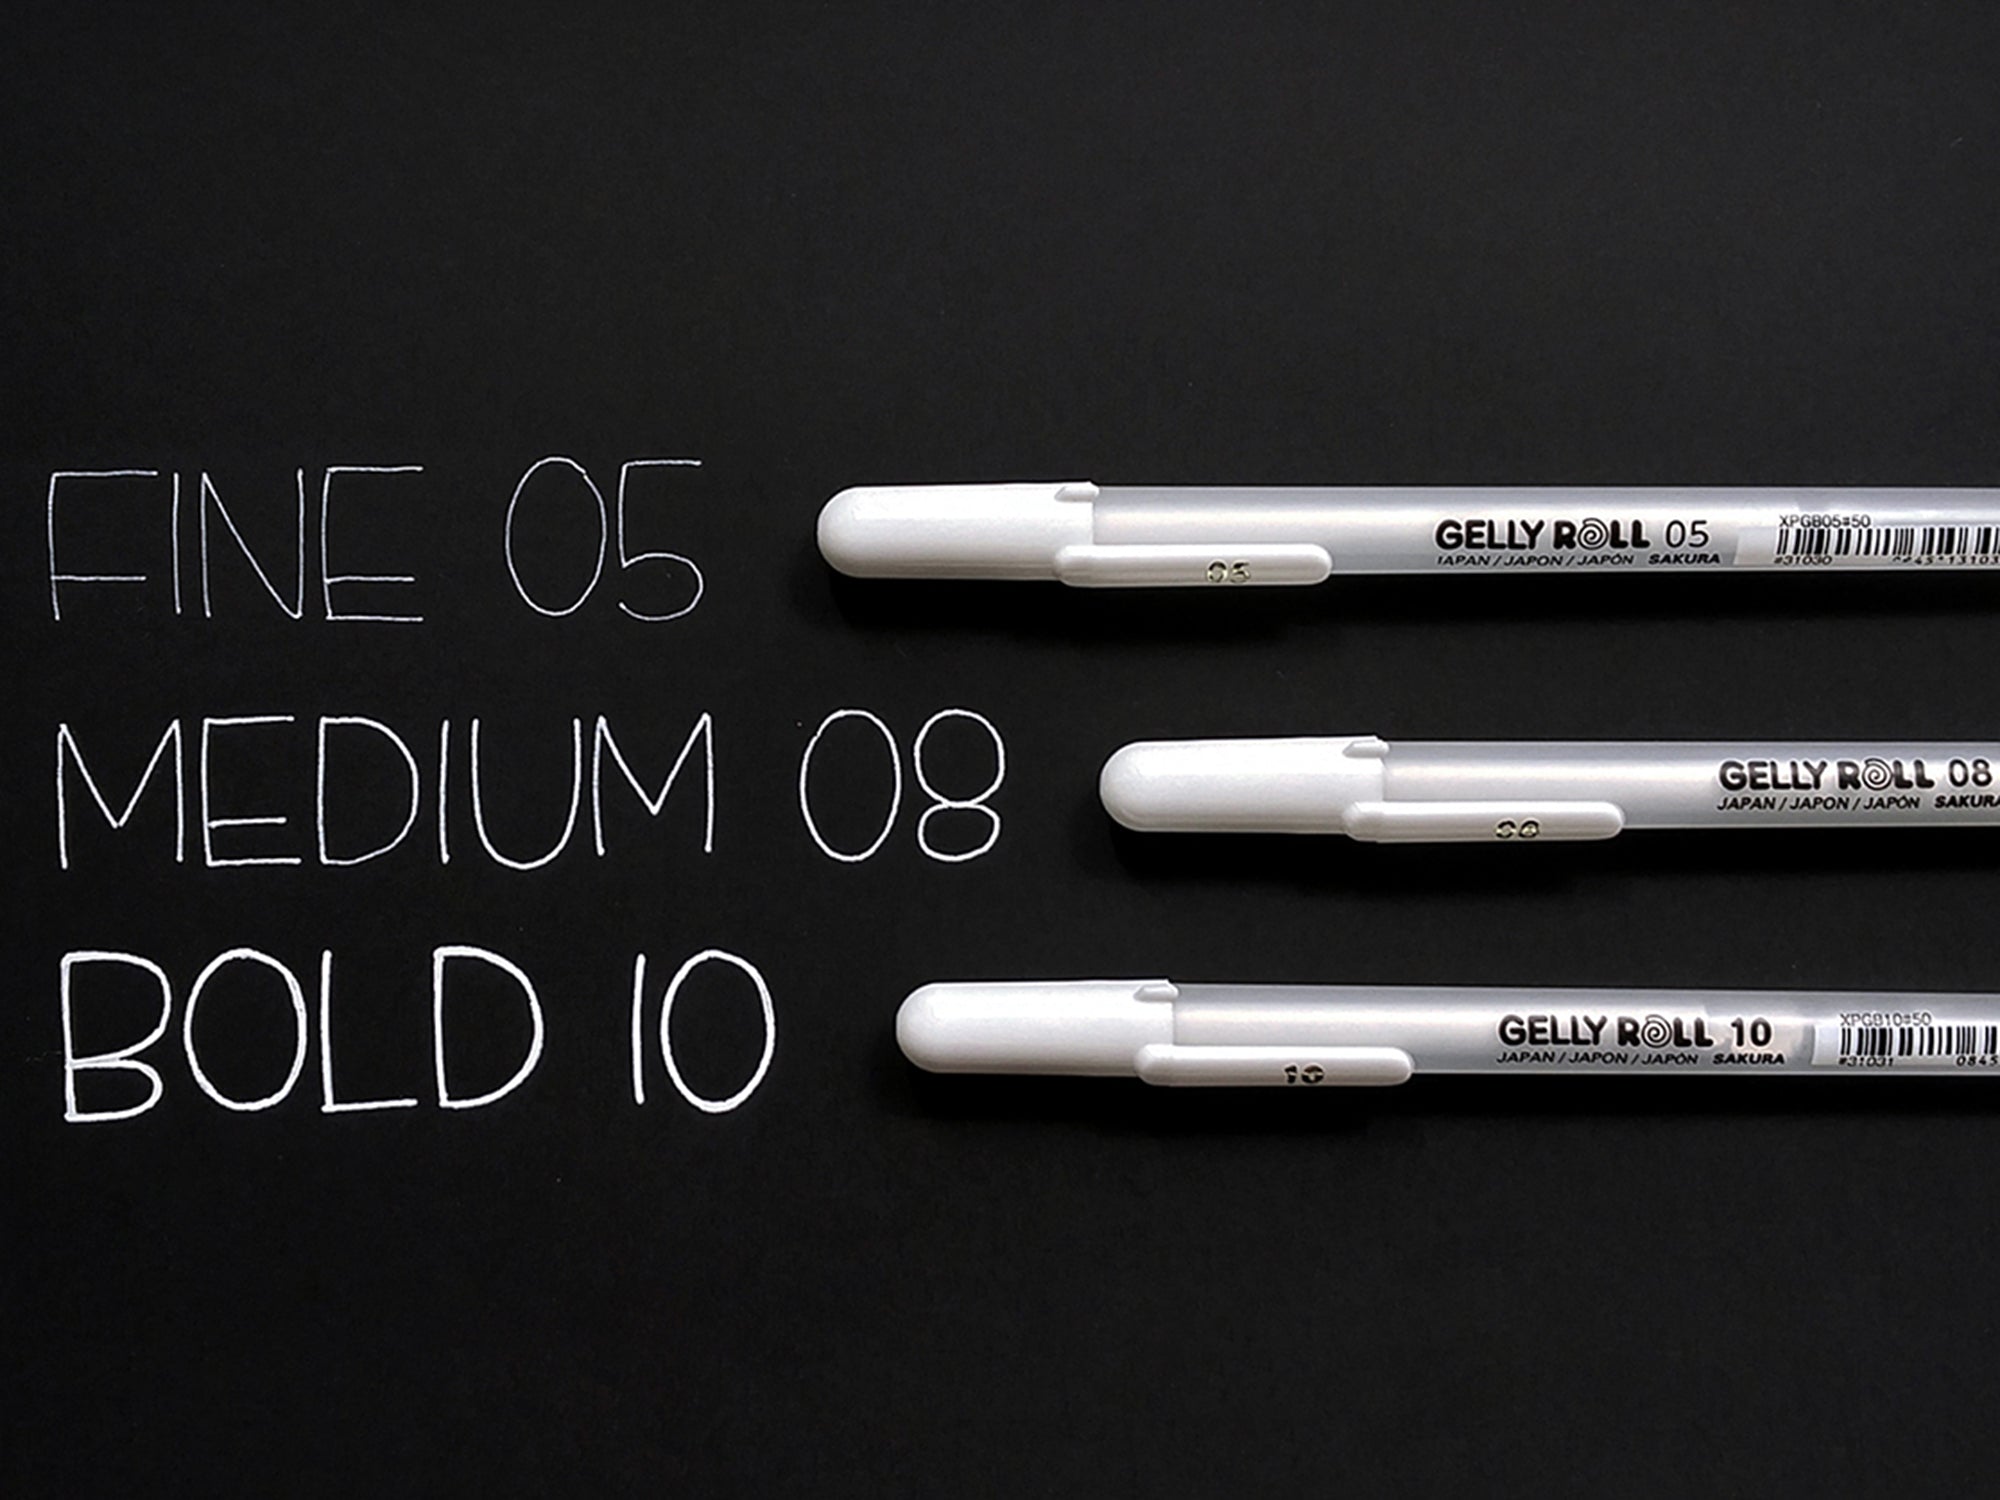 3 Colors Gel Pen Set - White, Gold and Silver 0.8 mm Nibs Gel Ink Pens,  Rollerball Pens for Black Paper Drawing, Sketching